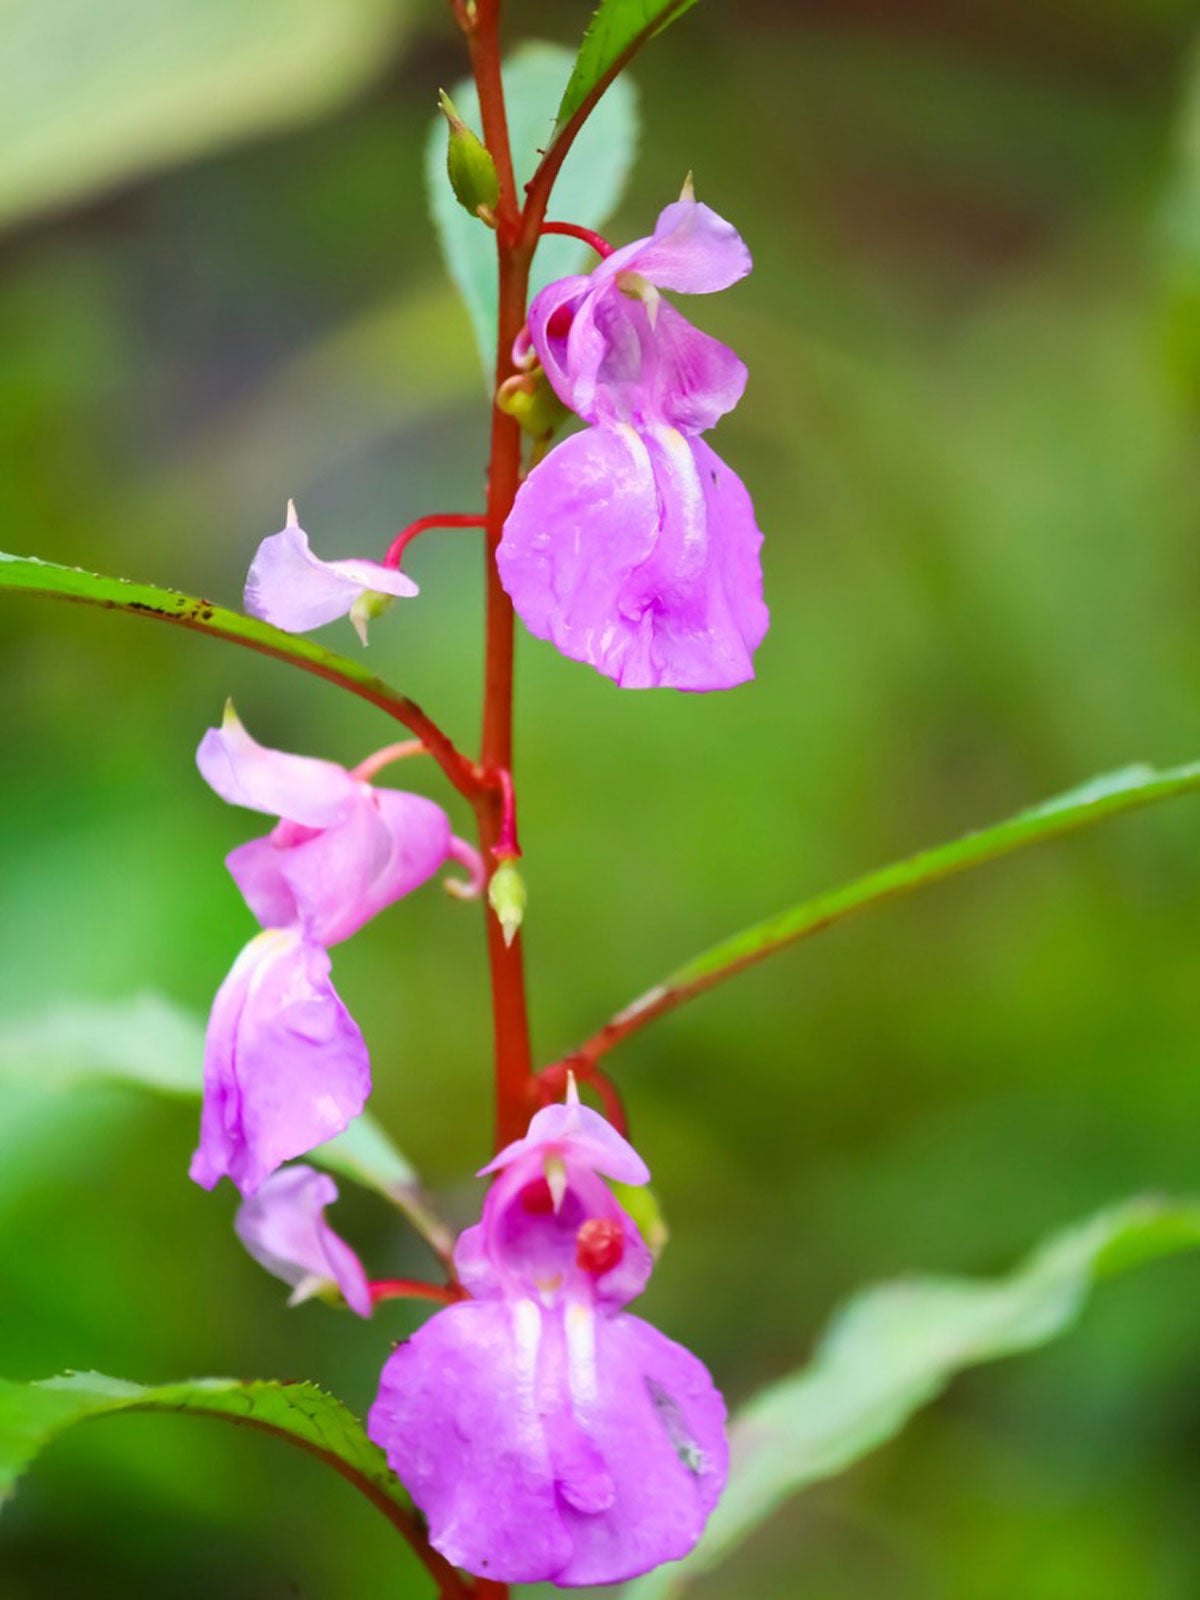 caring for balsam in the garden - how to grow balsam plants